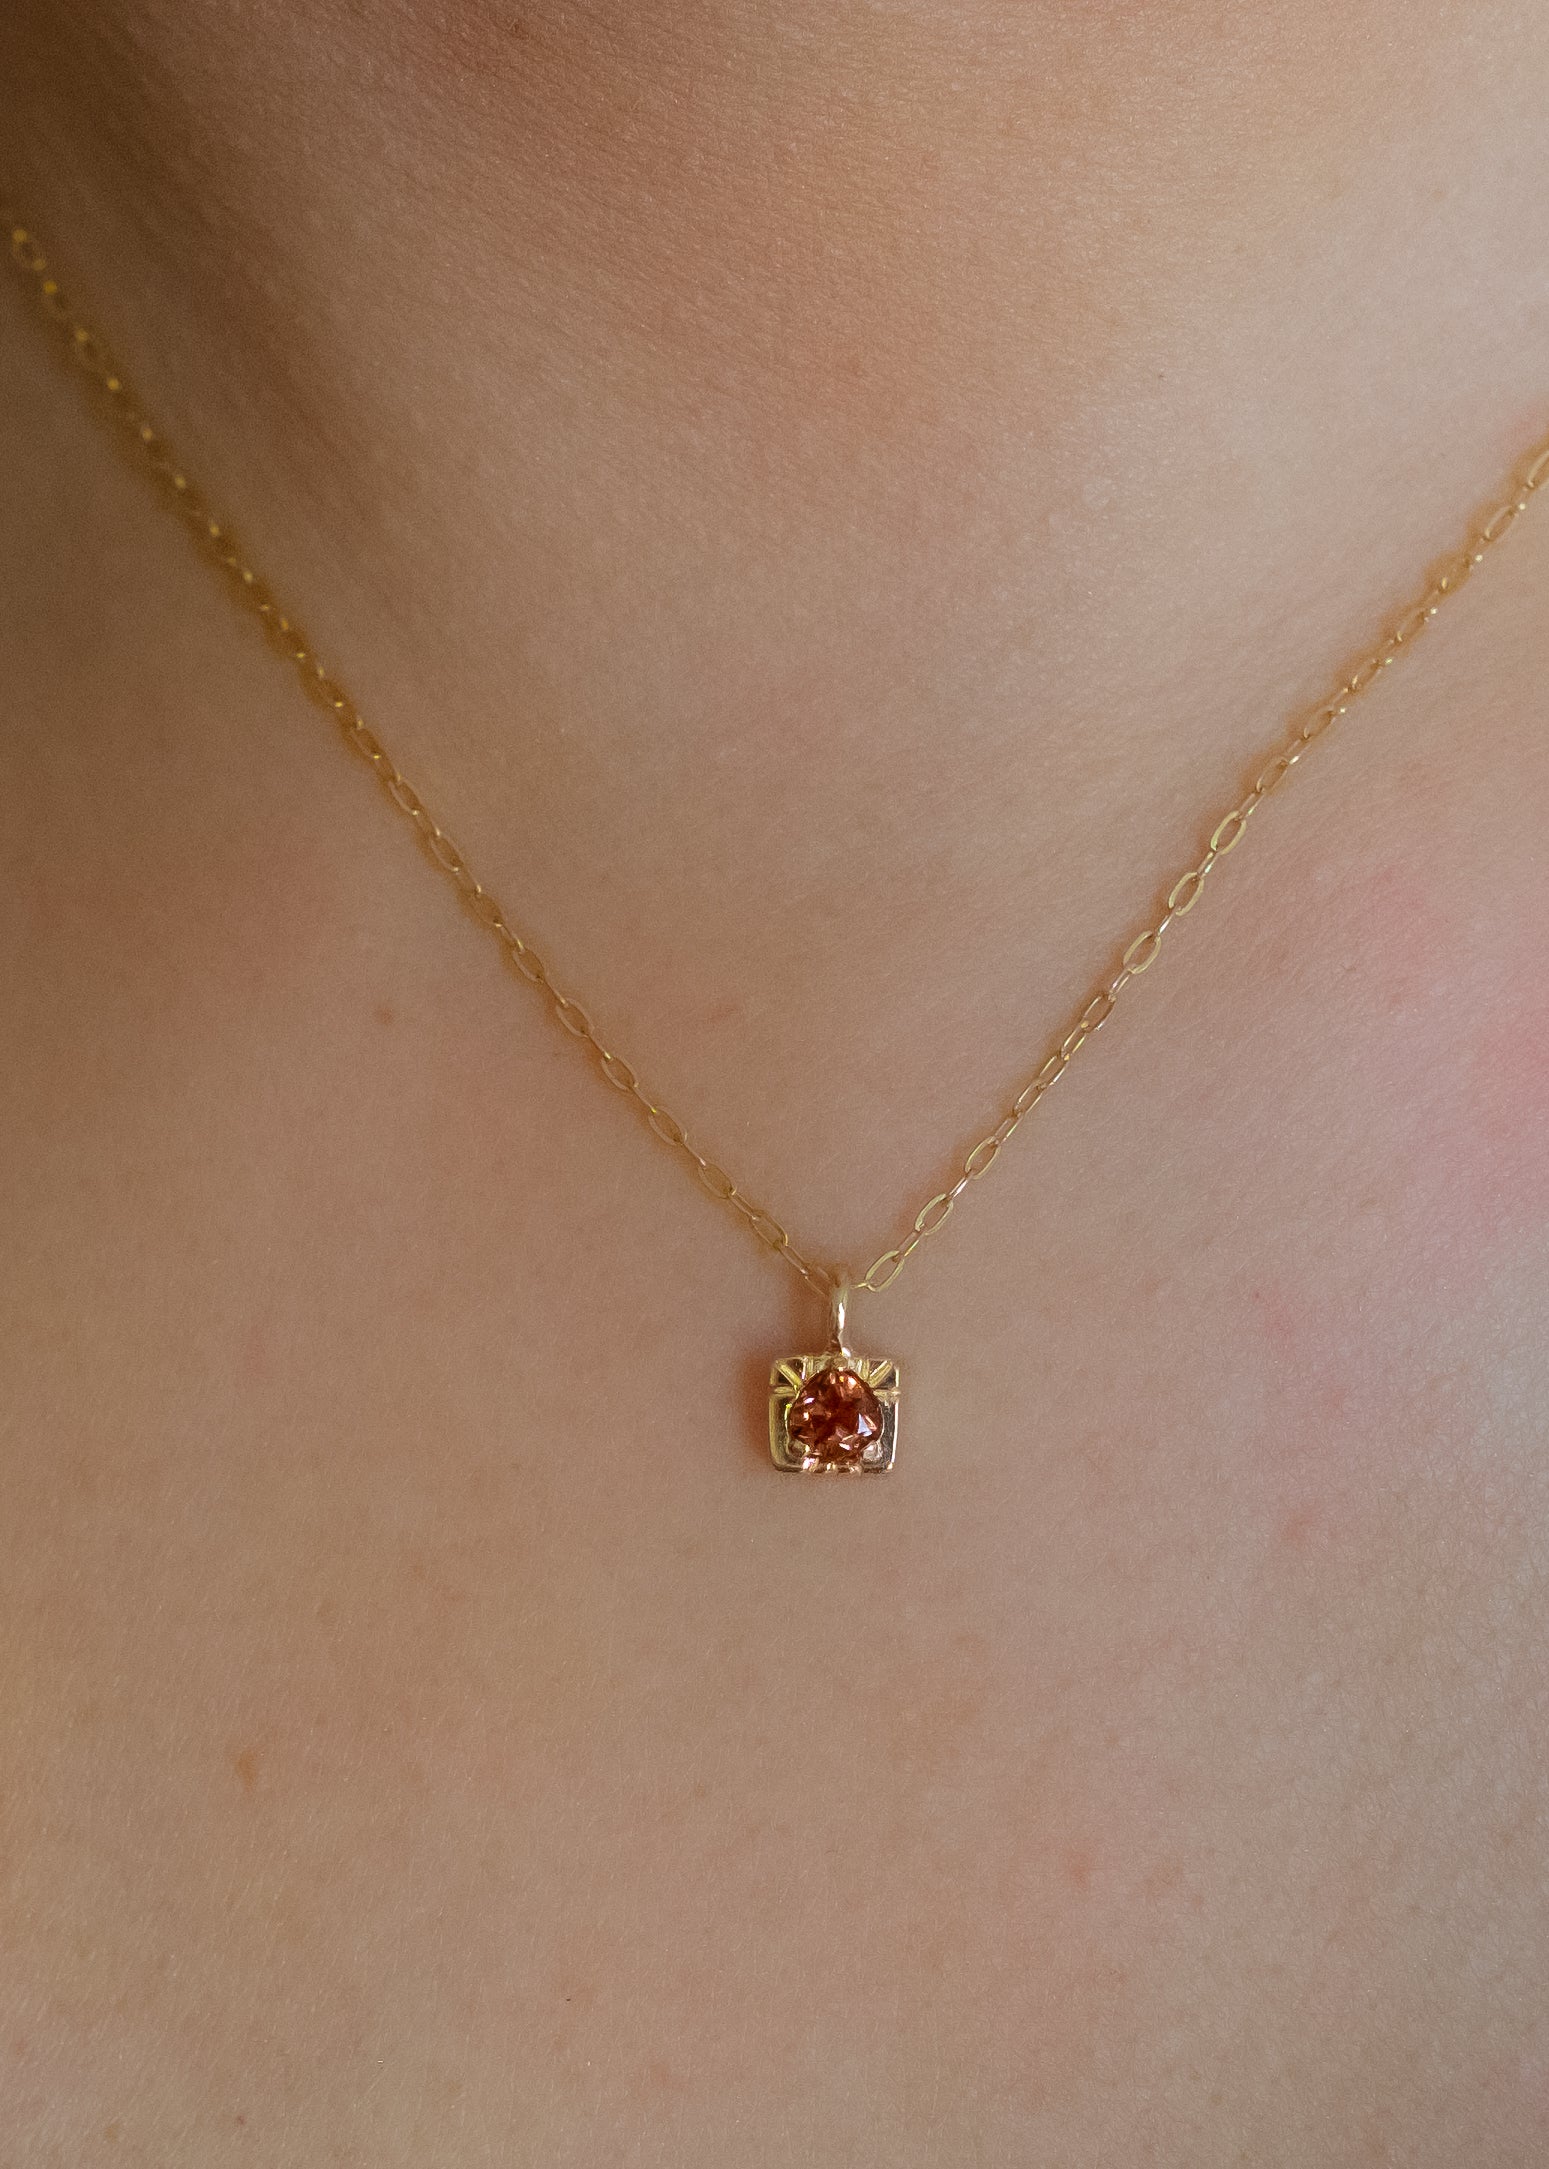 The fire of inspiration ignites with a single spark. Named after the Greek goddess of the hearth, the Vesta necklace features an engraved box-shaped gold charm with a tourmaline stone that glimmers like sacred embers–a piece that glows with promise and warmth. 